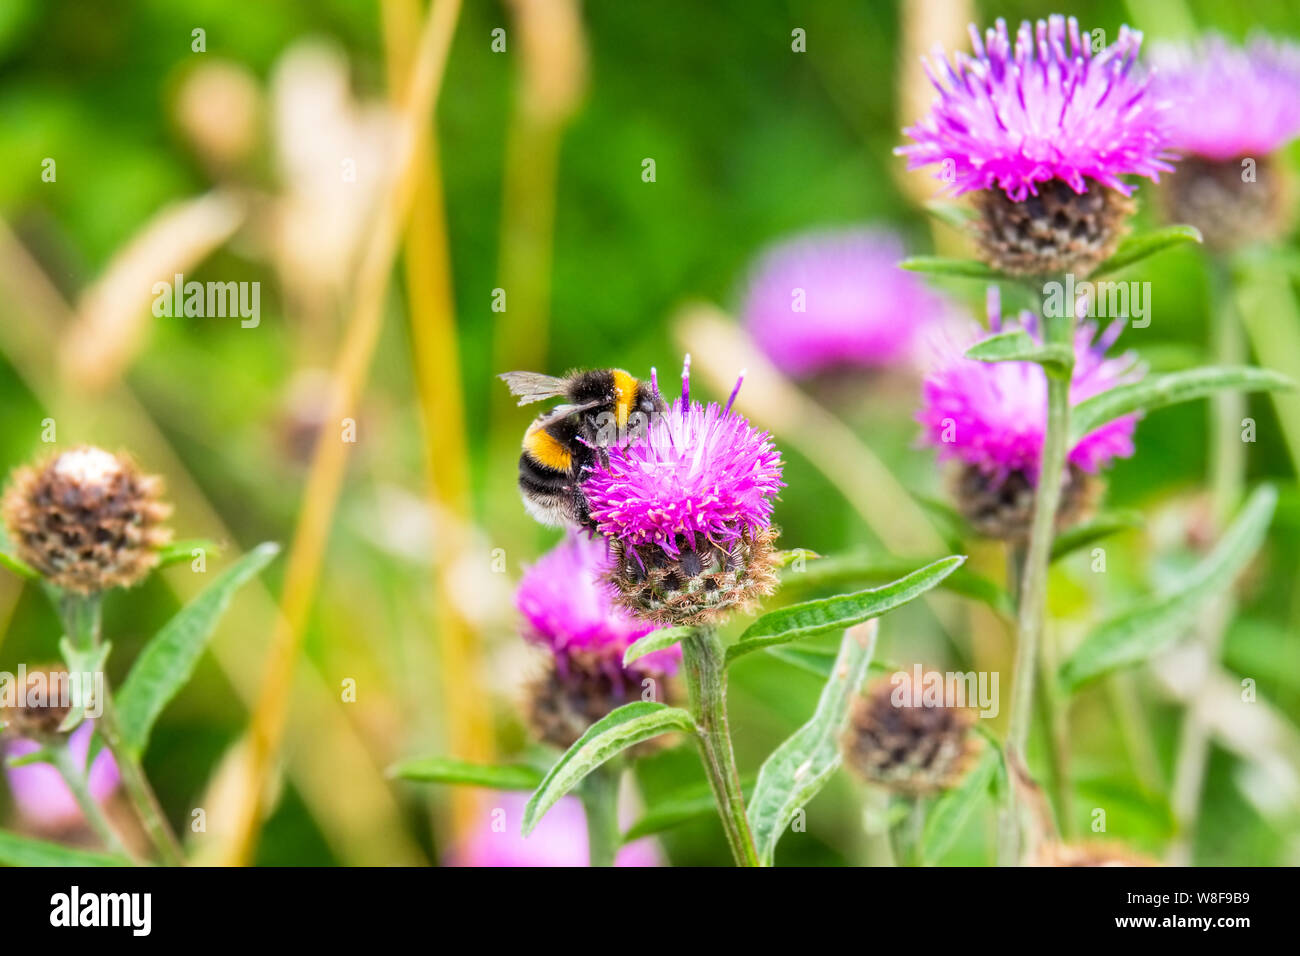 A Bumblebee (Bombus) on thistles in a hedgerow, Wales, UK Stock Photo